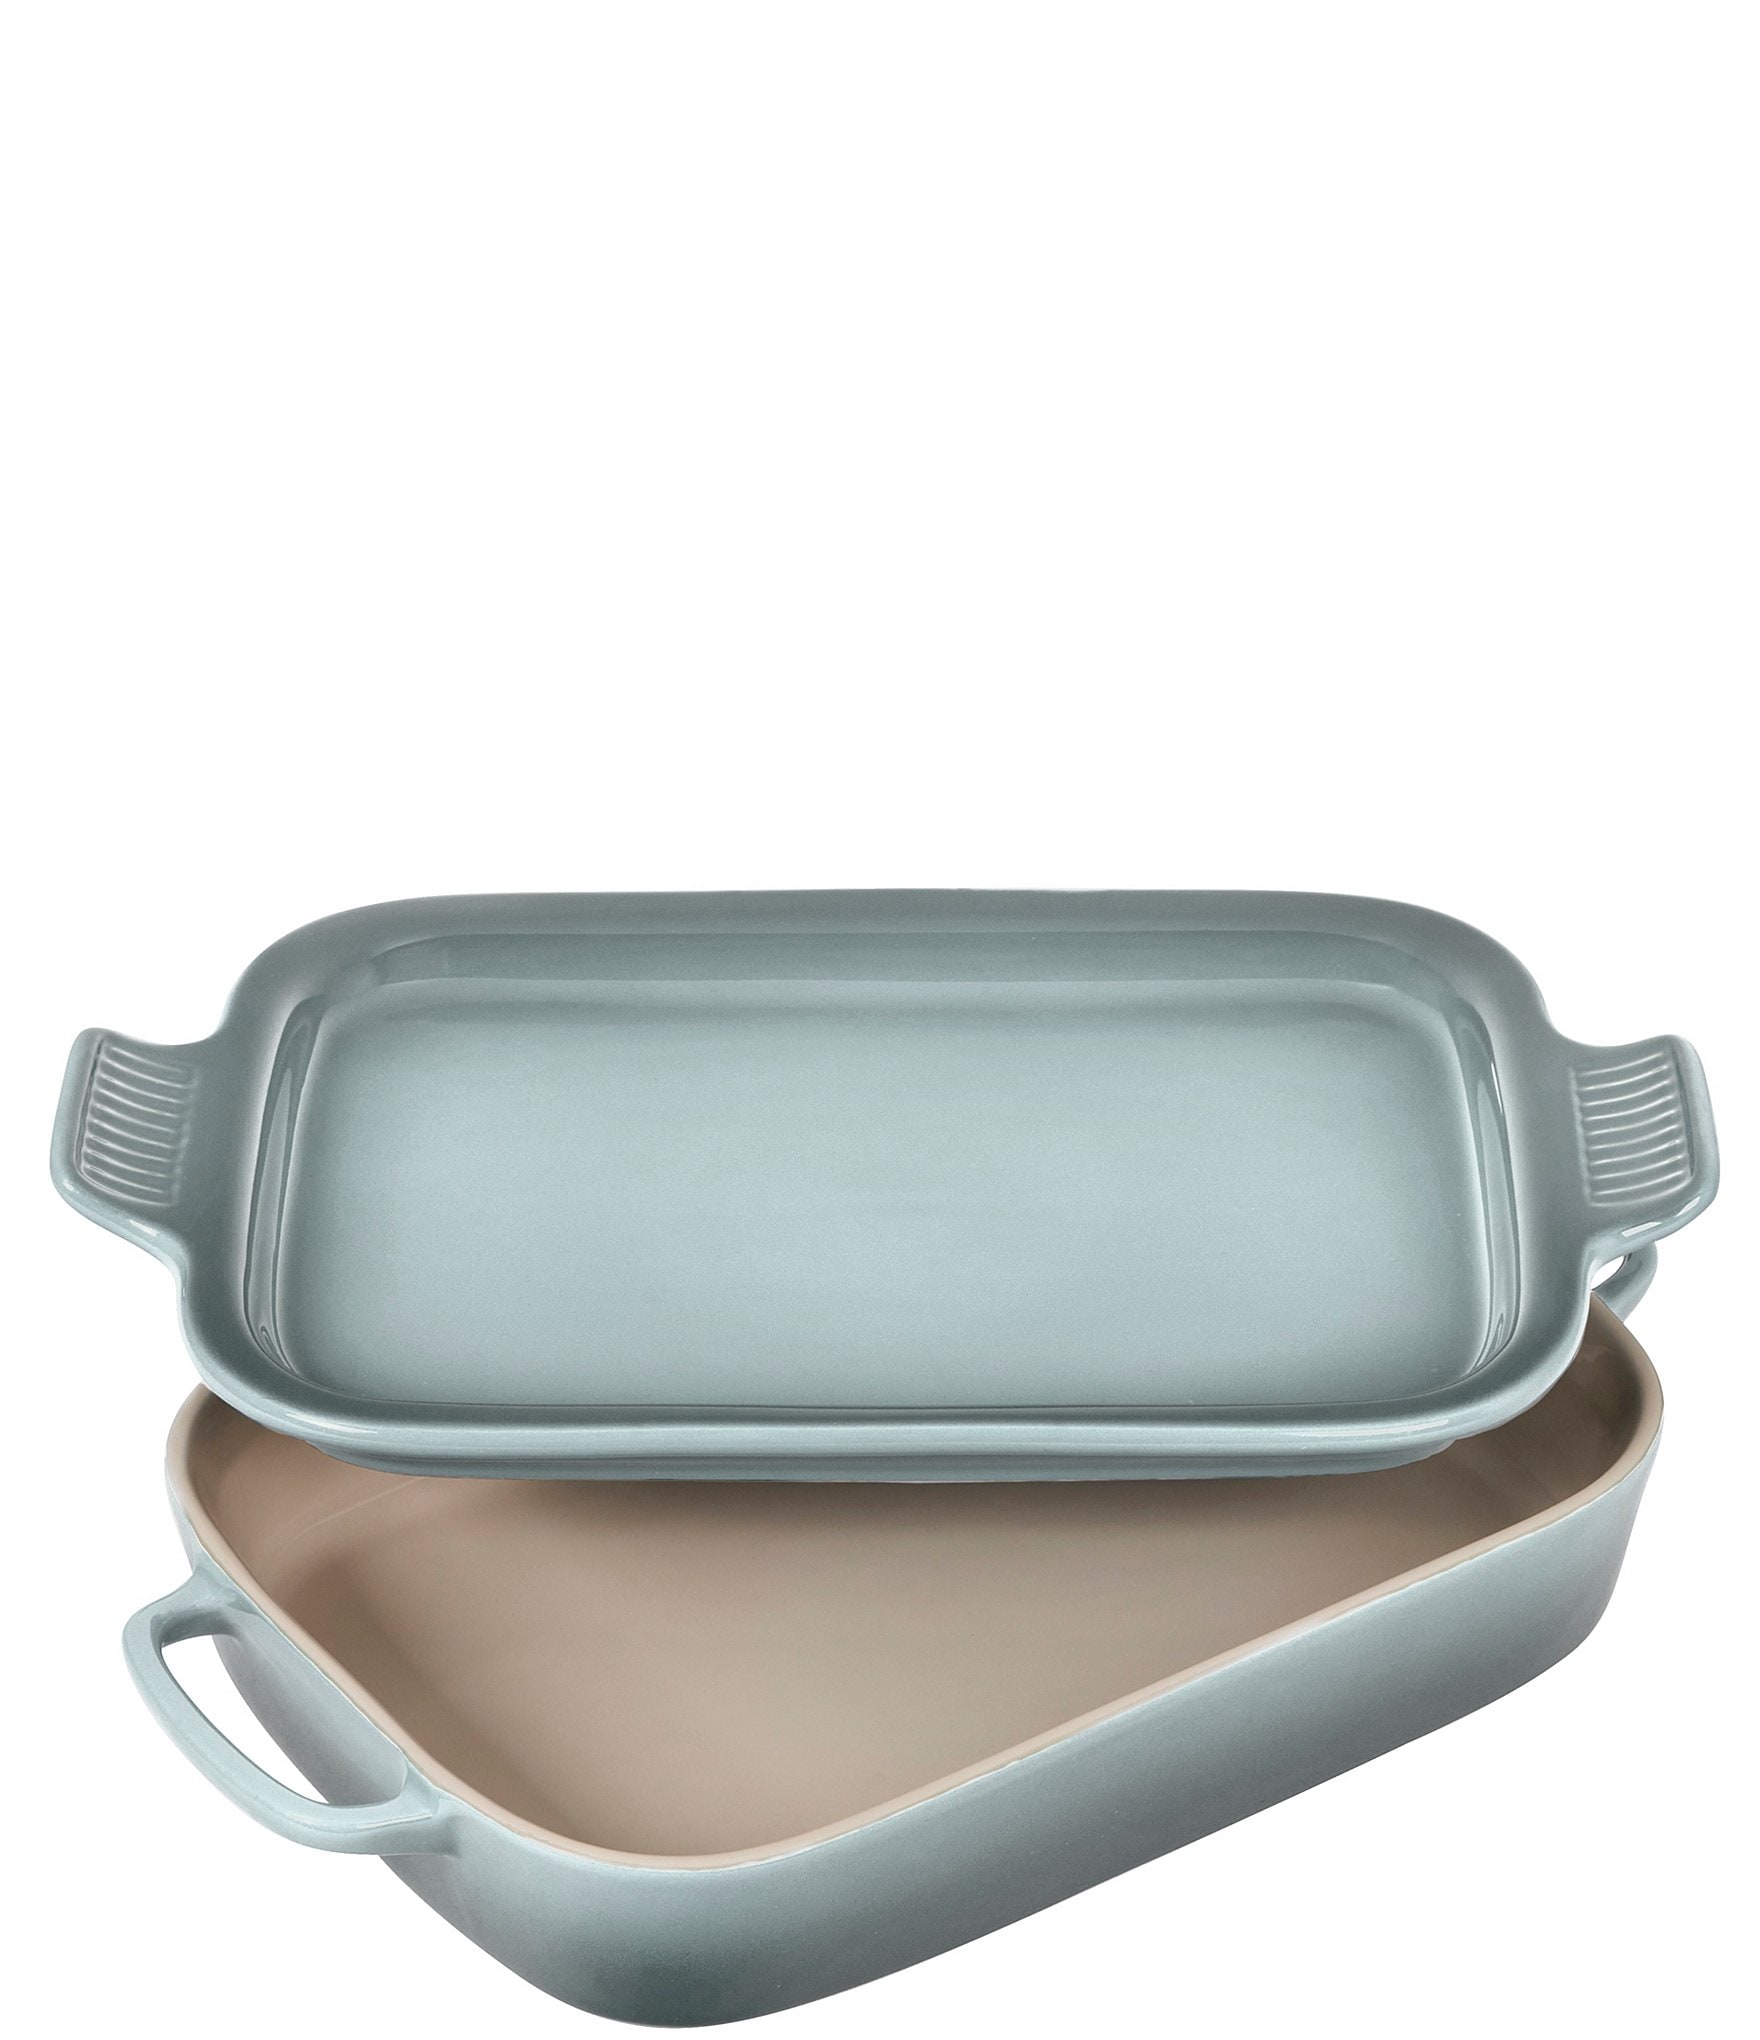 Creative Ways to Use the Rectangular Dish with Platter Lid